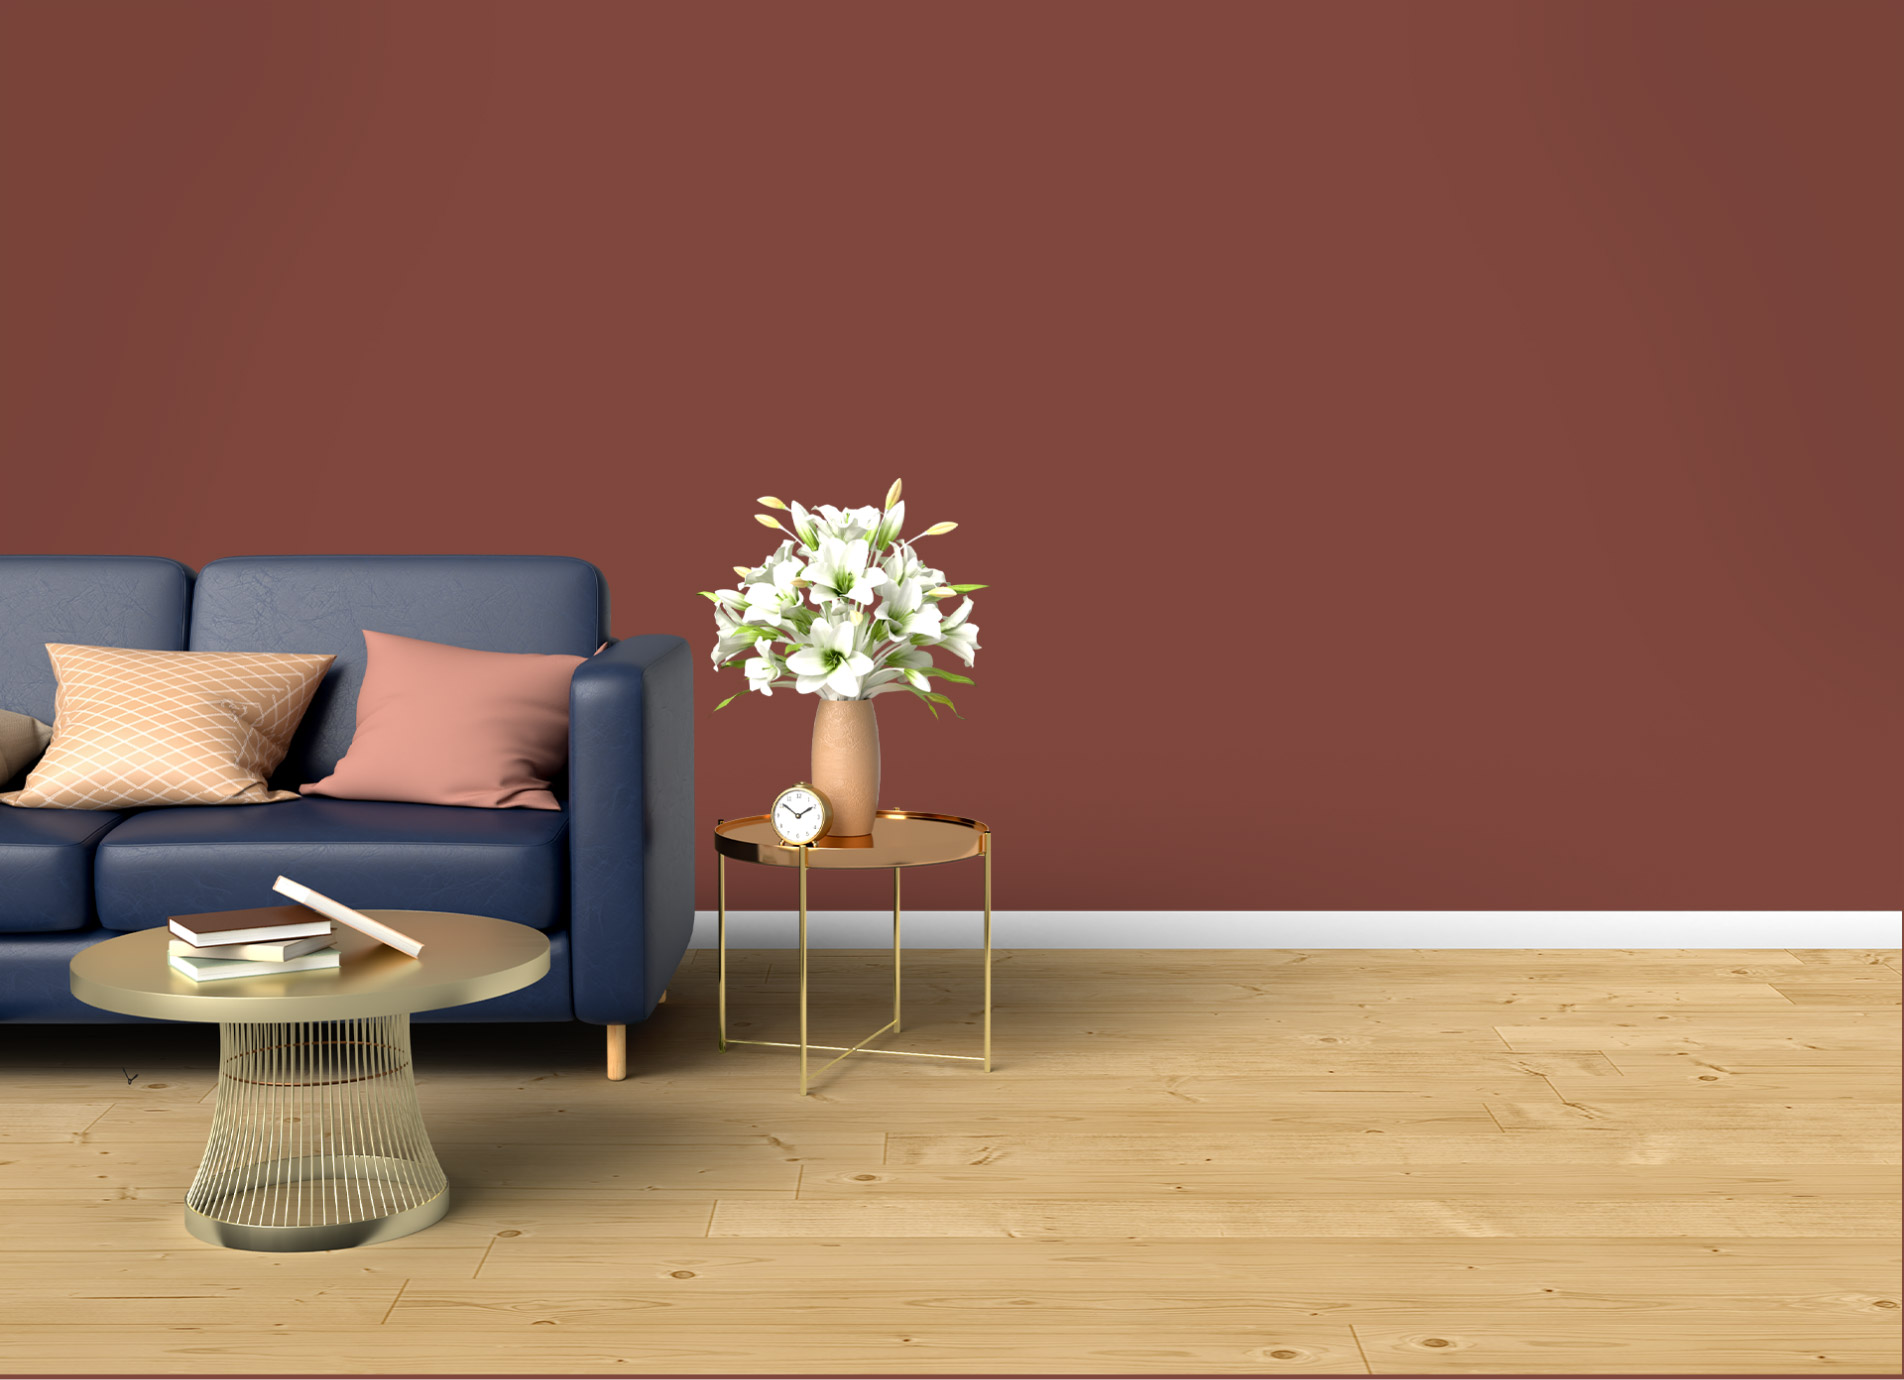 Ming Red, 1800+ Wall Paint Colors